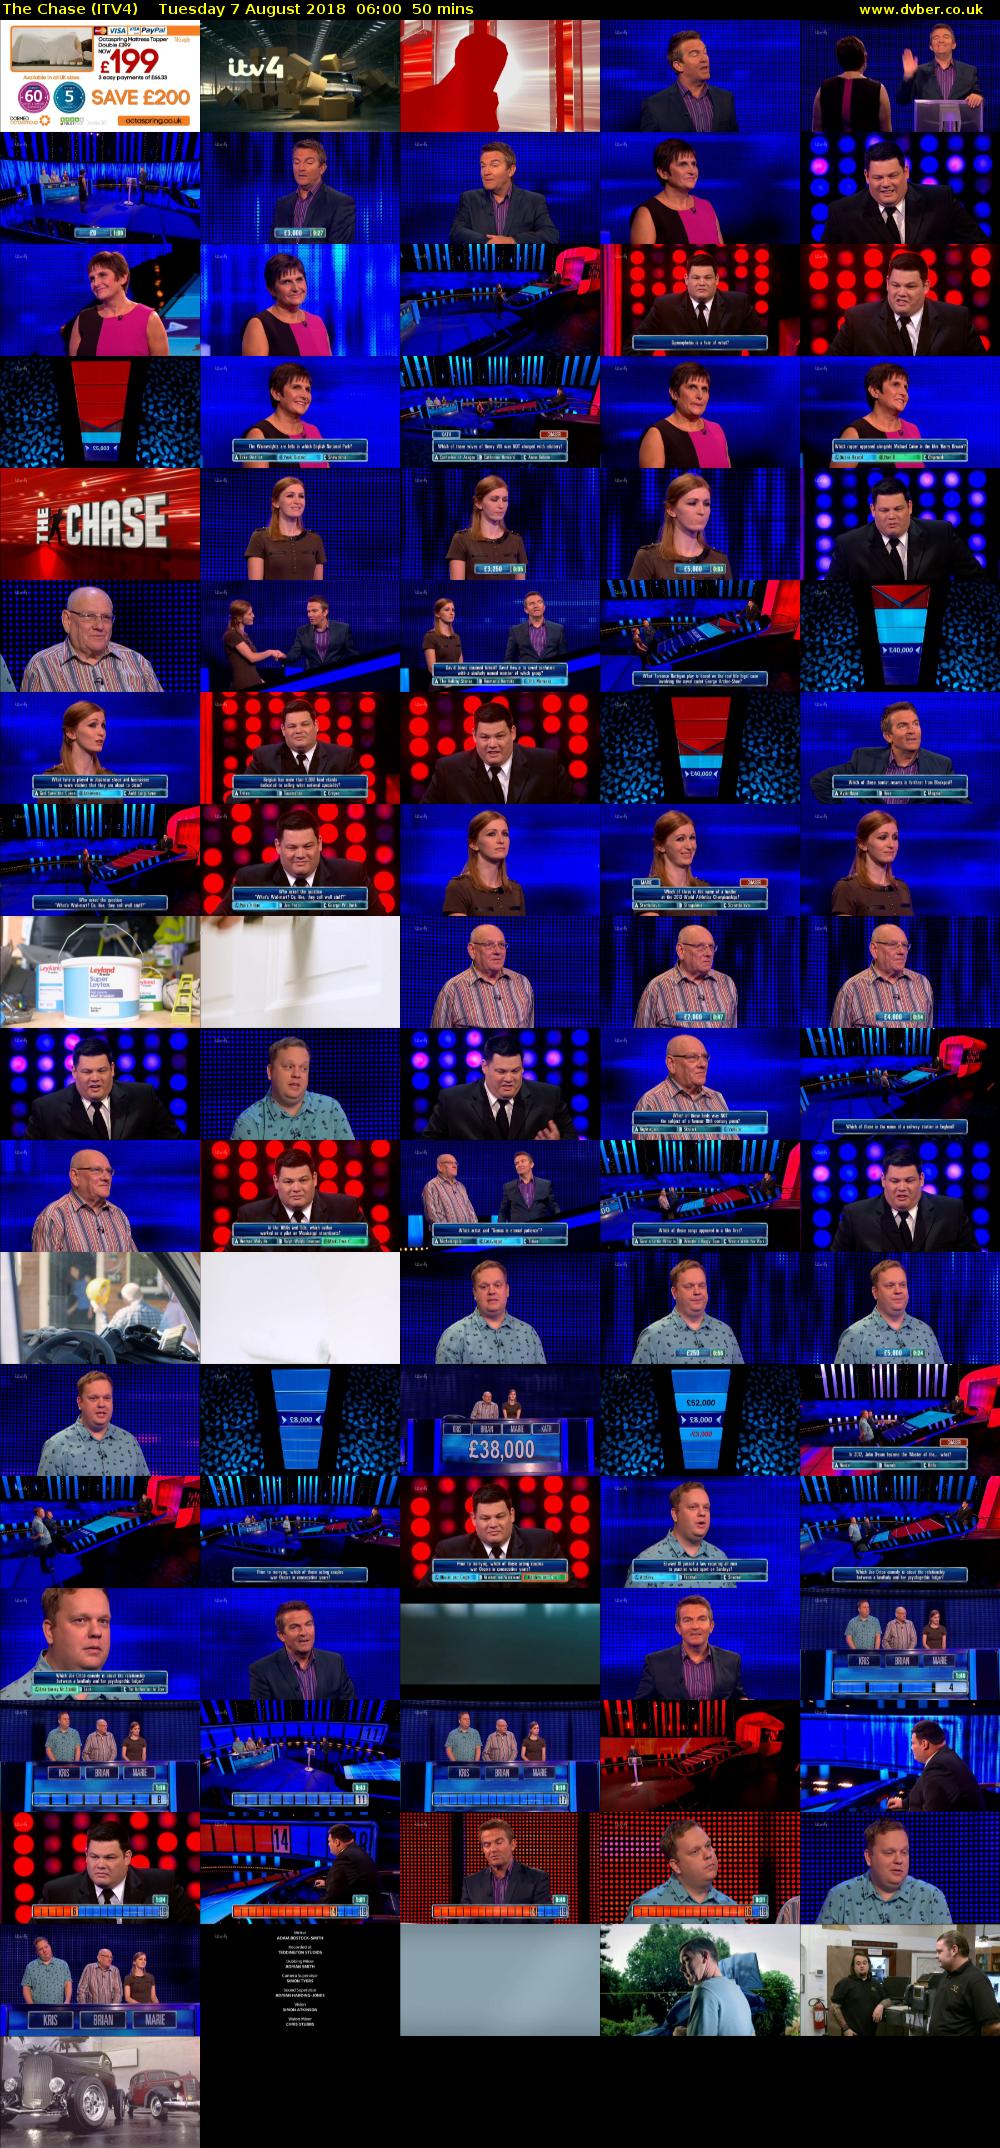 The Chase (ITV4) Tuesday 7 August 2018 06:00 - 06:50